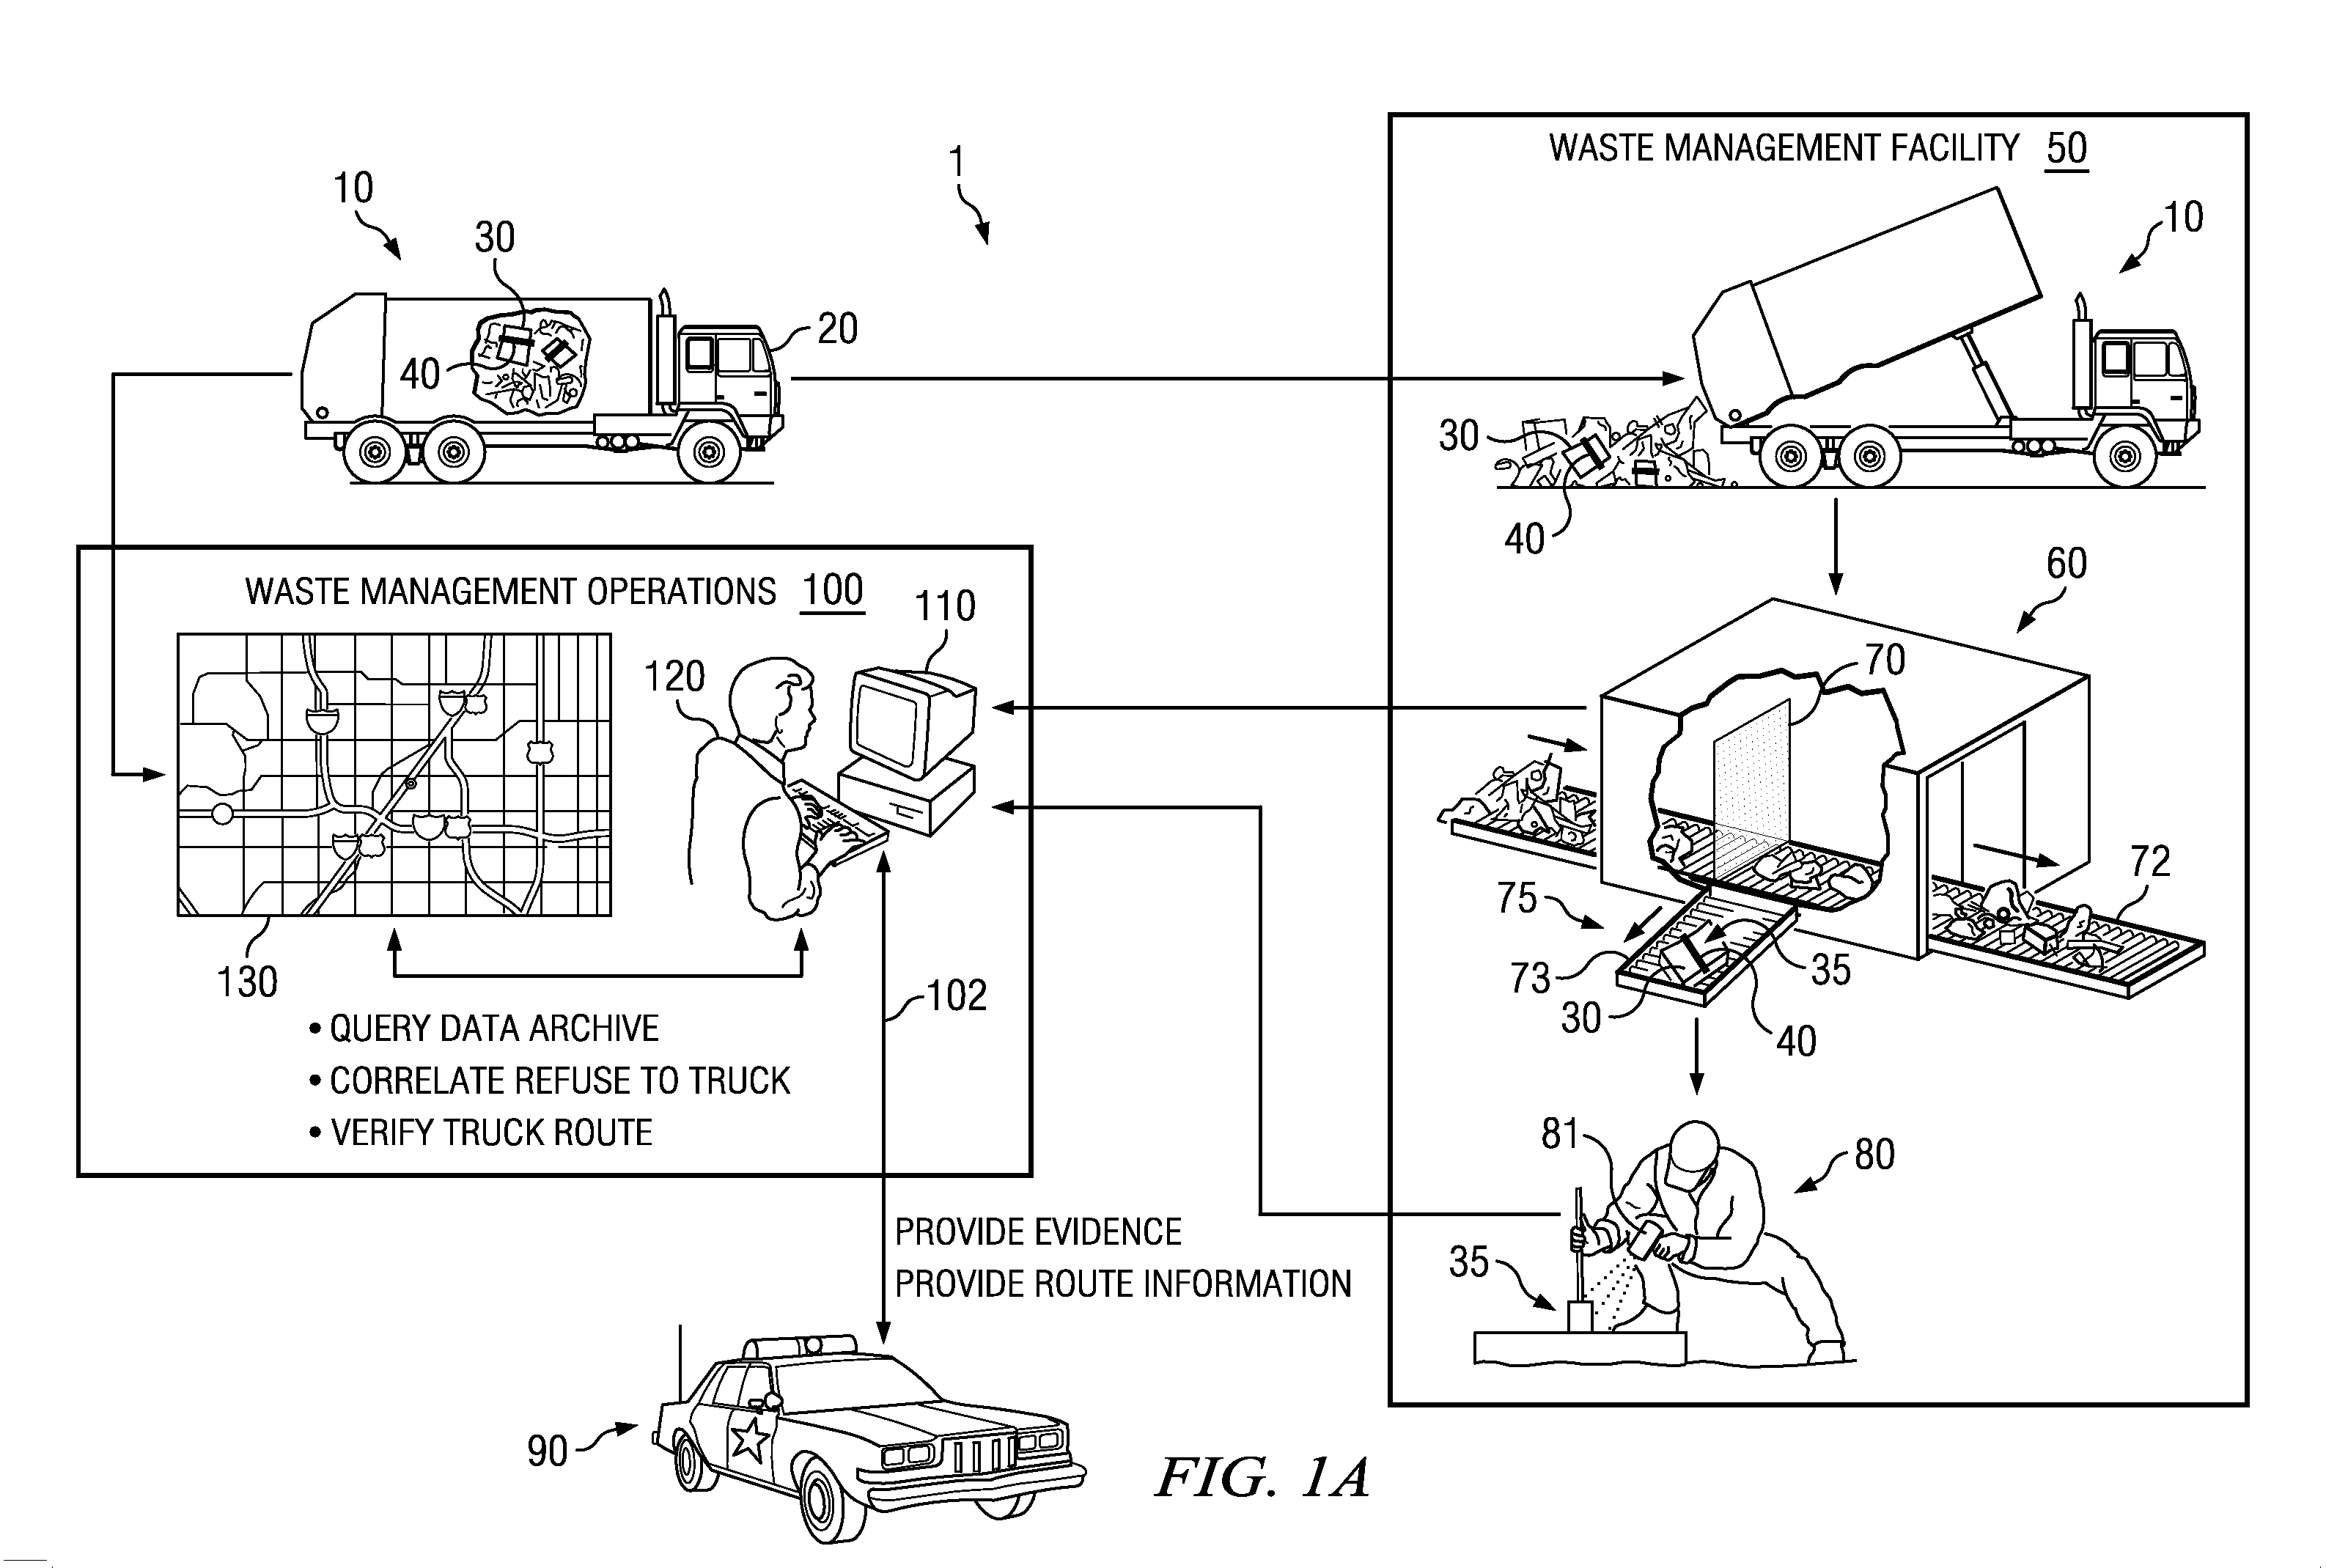 Systems and Methods for Detecting and Geo-Locating Hazardous Refuse